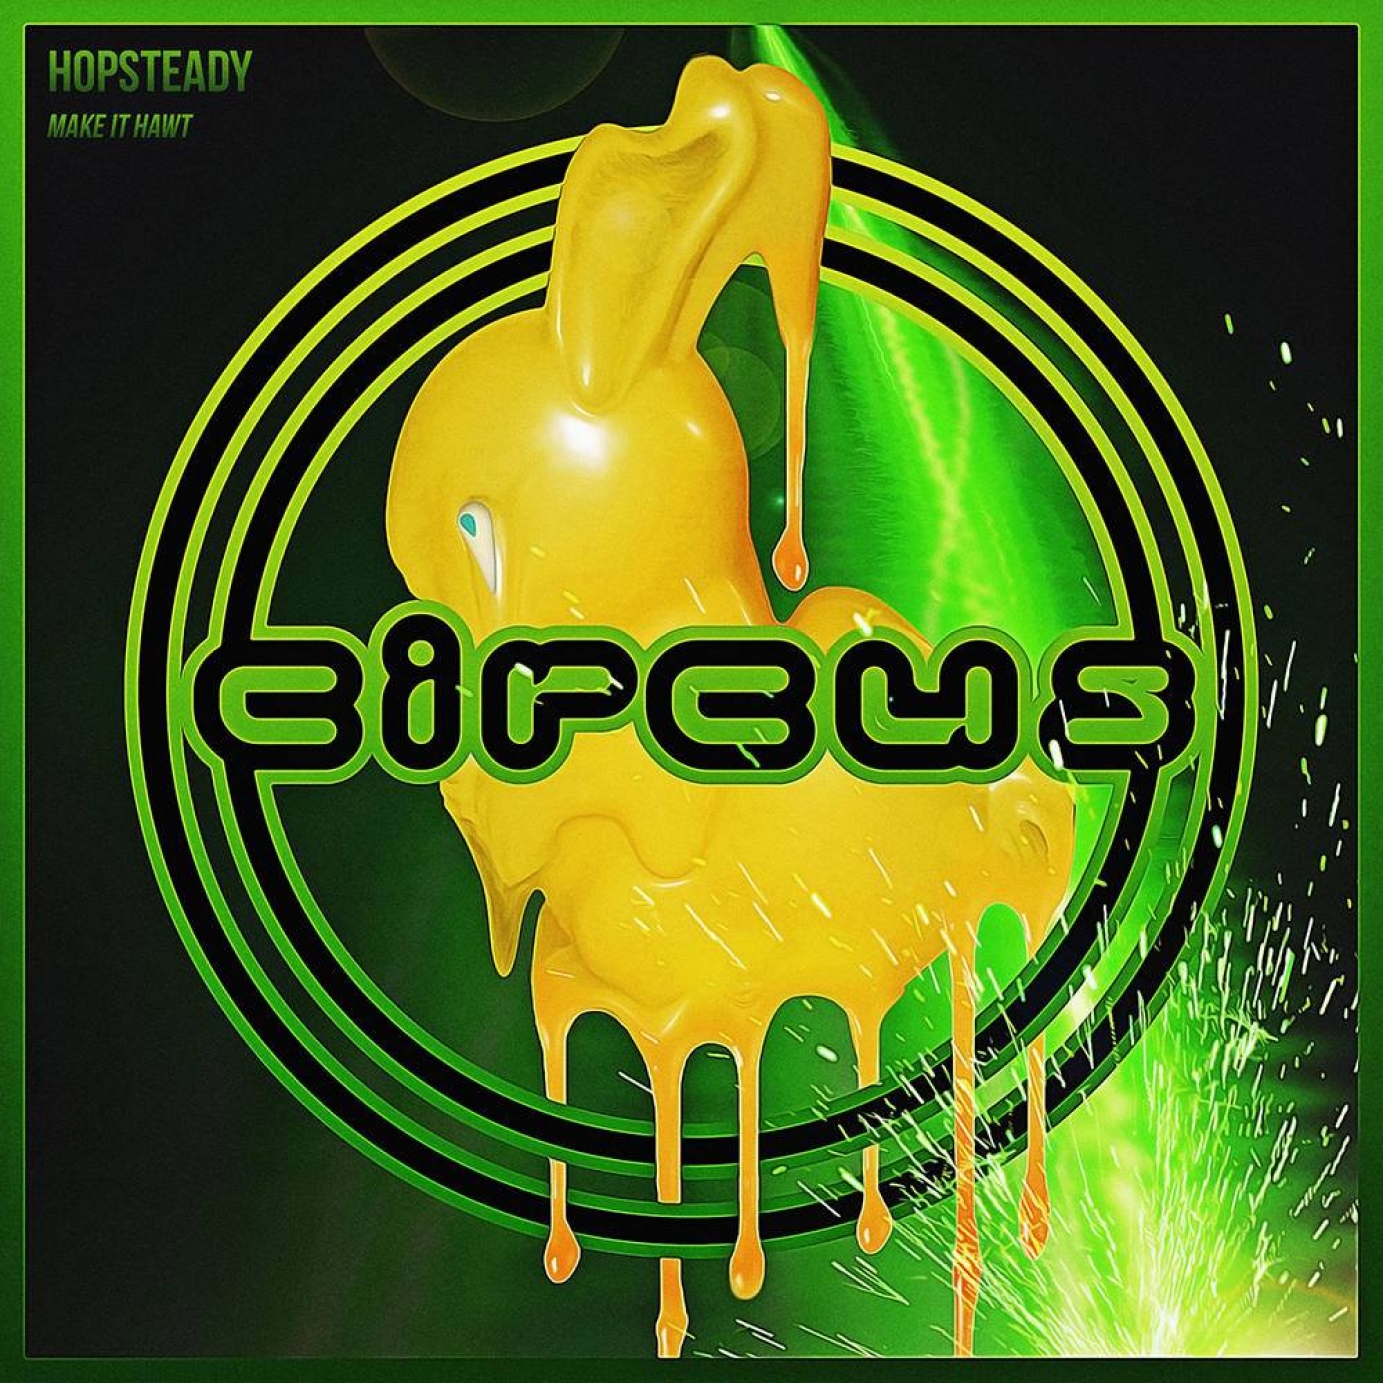 Artwork for Circus Records by ASYLUMseventy7